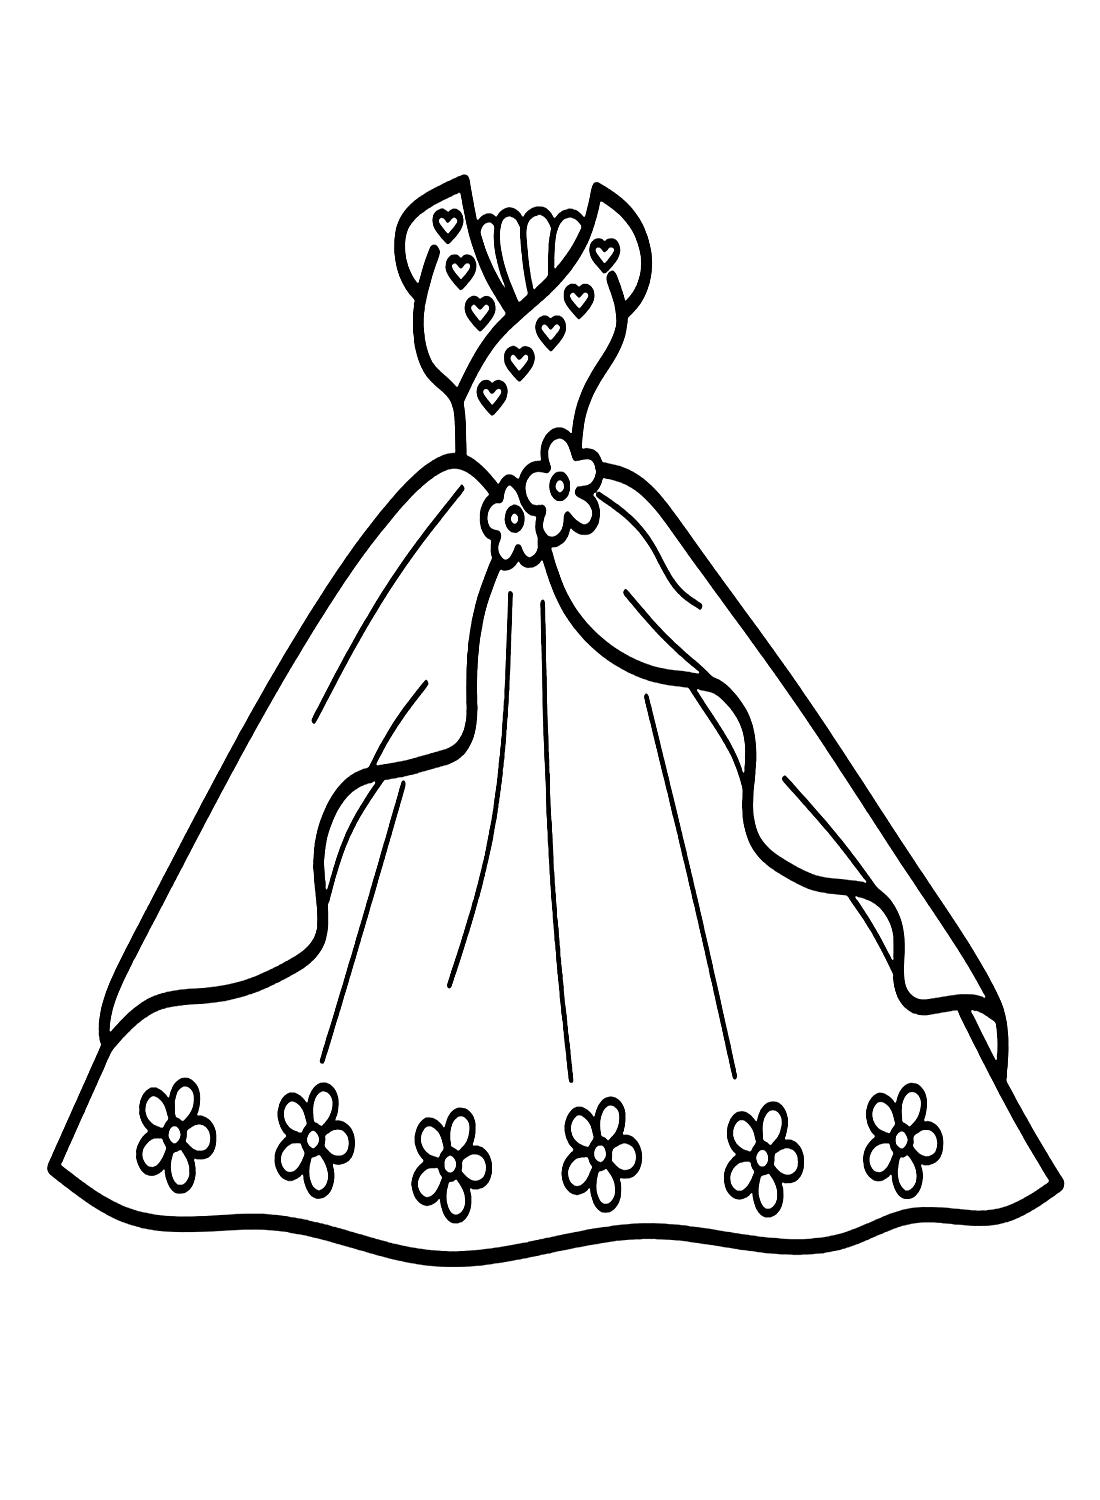 Wedding Dress with Flowers Coloring Page - Free Printable Coloring Pages